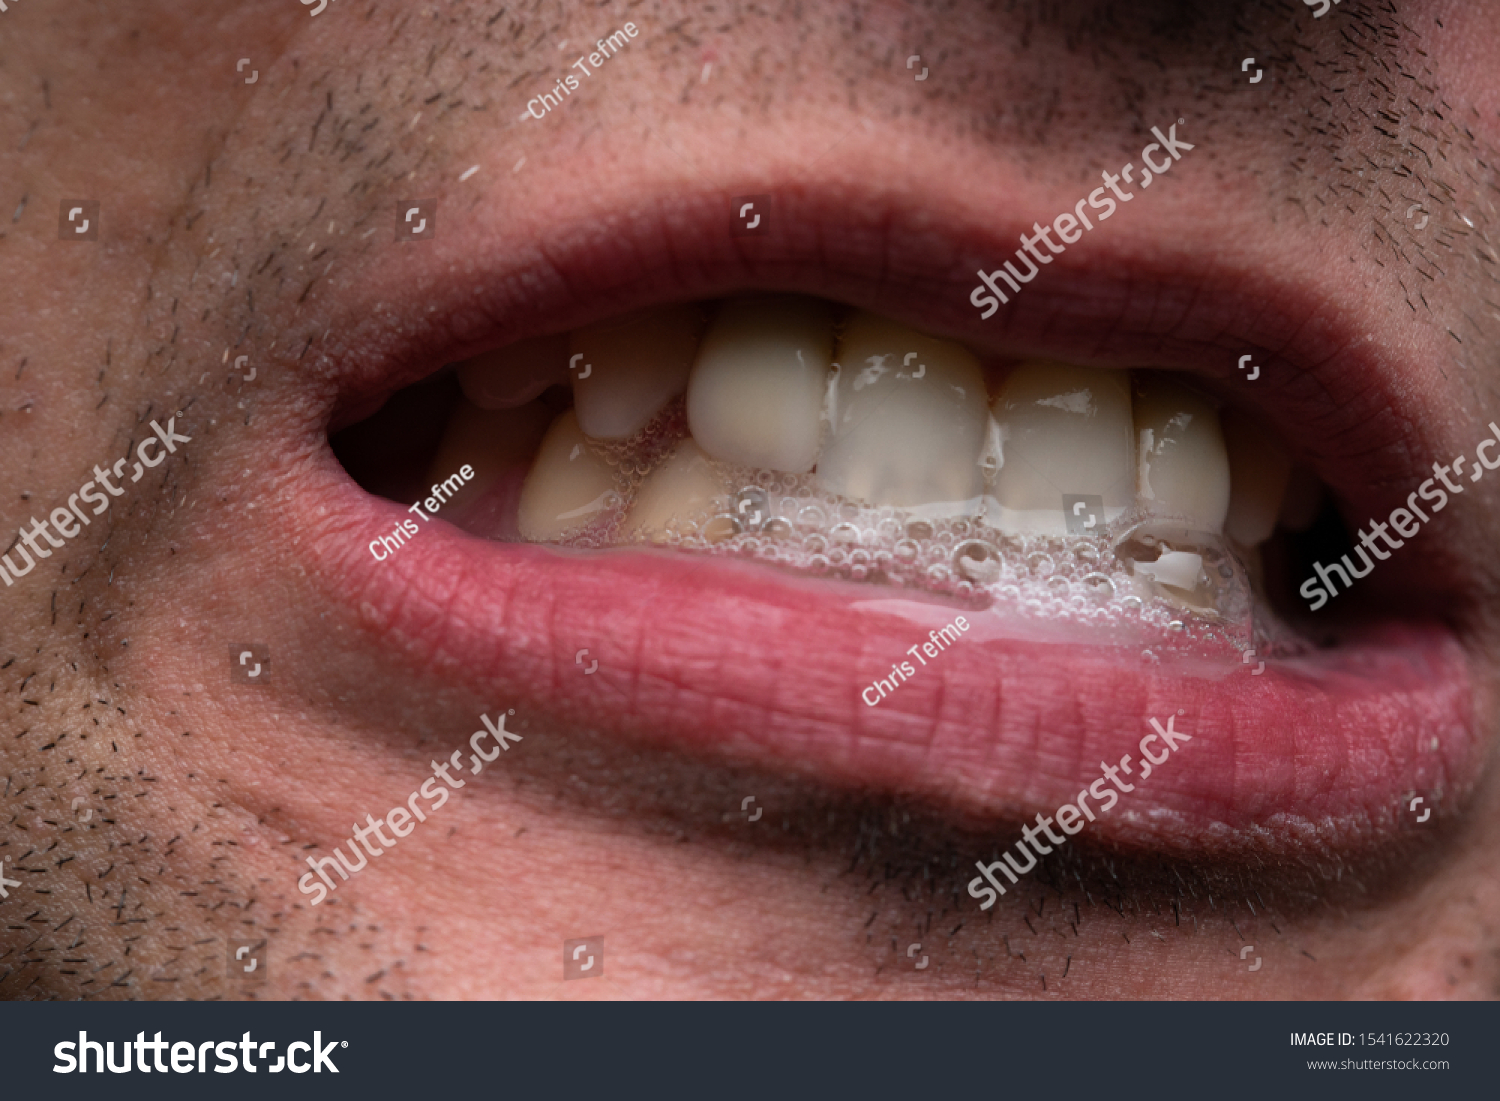 Image of young man with saliva, showing teeth #1541622320